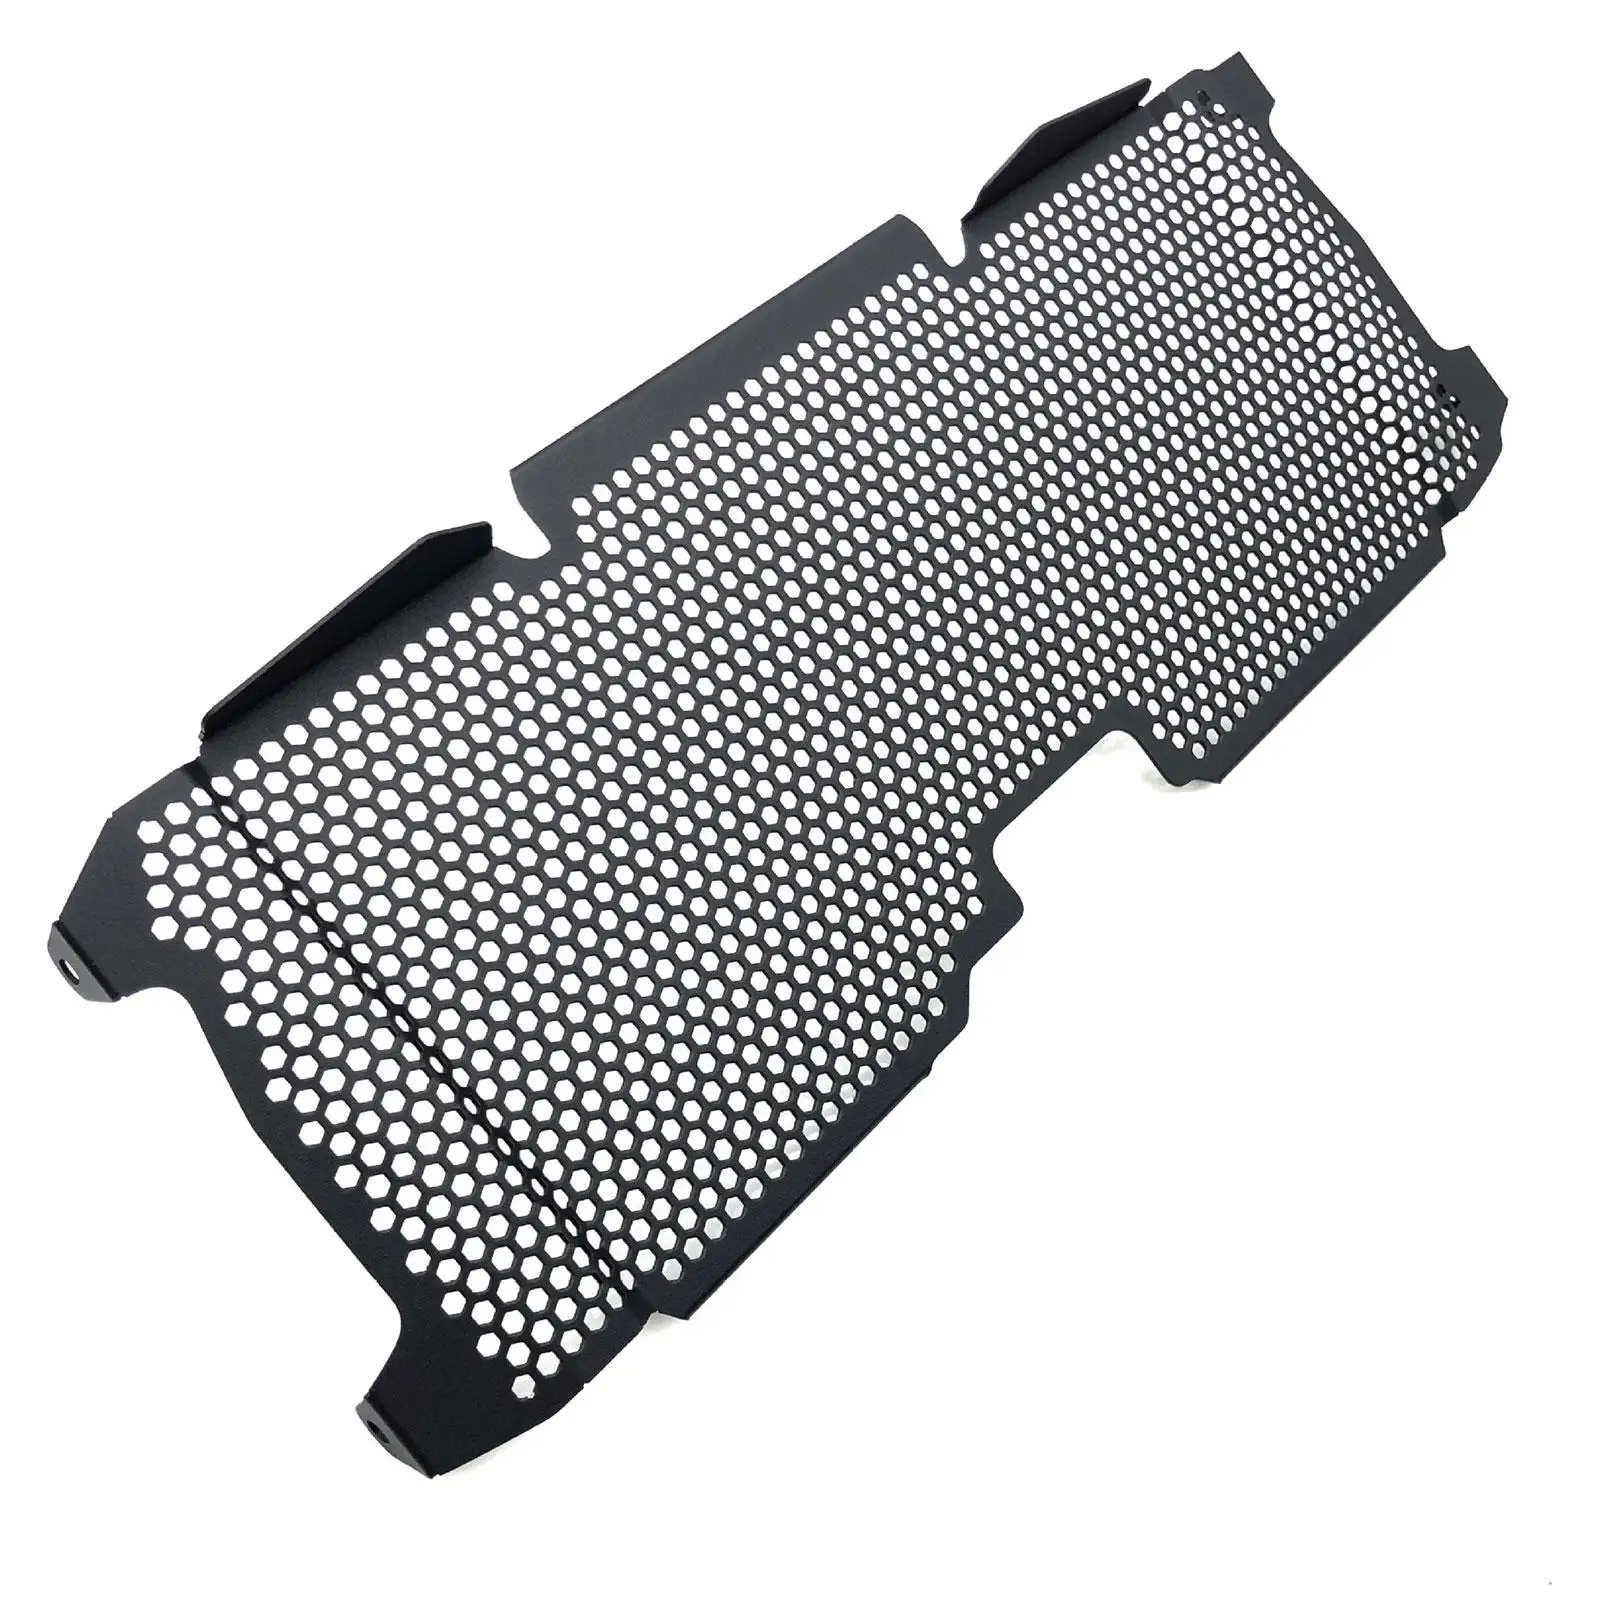 Radiator Grille Guard Protector Grill Cover Motorcycle Refits Easy to Install